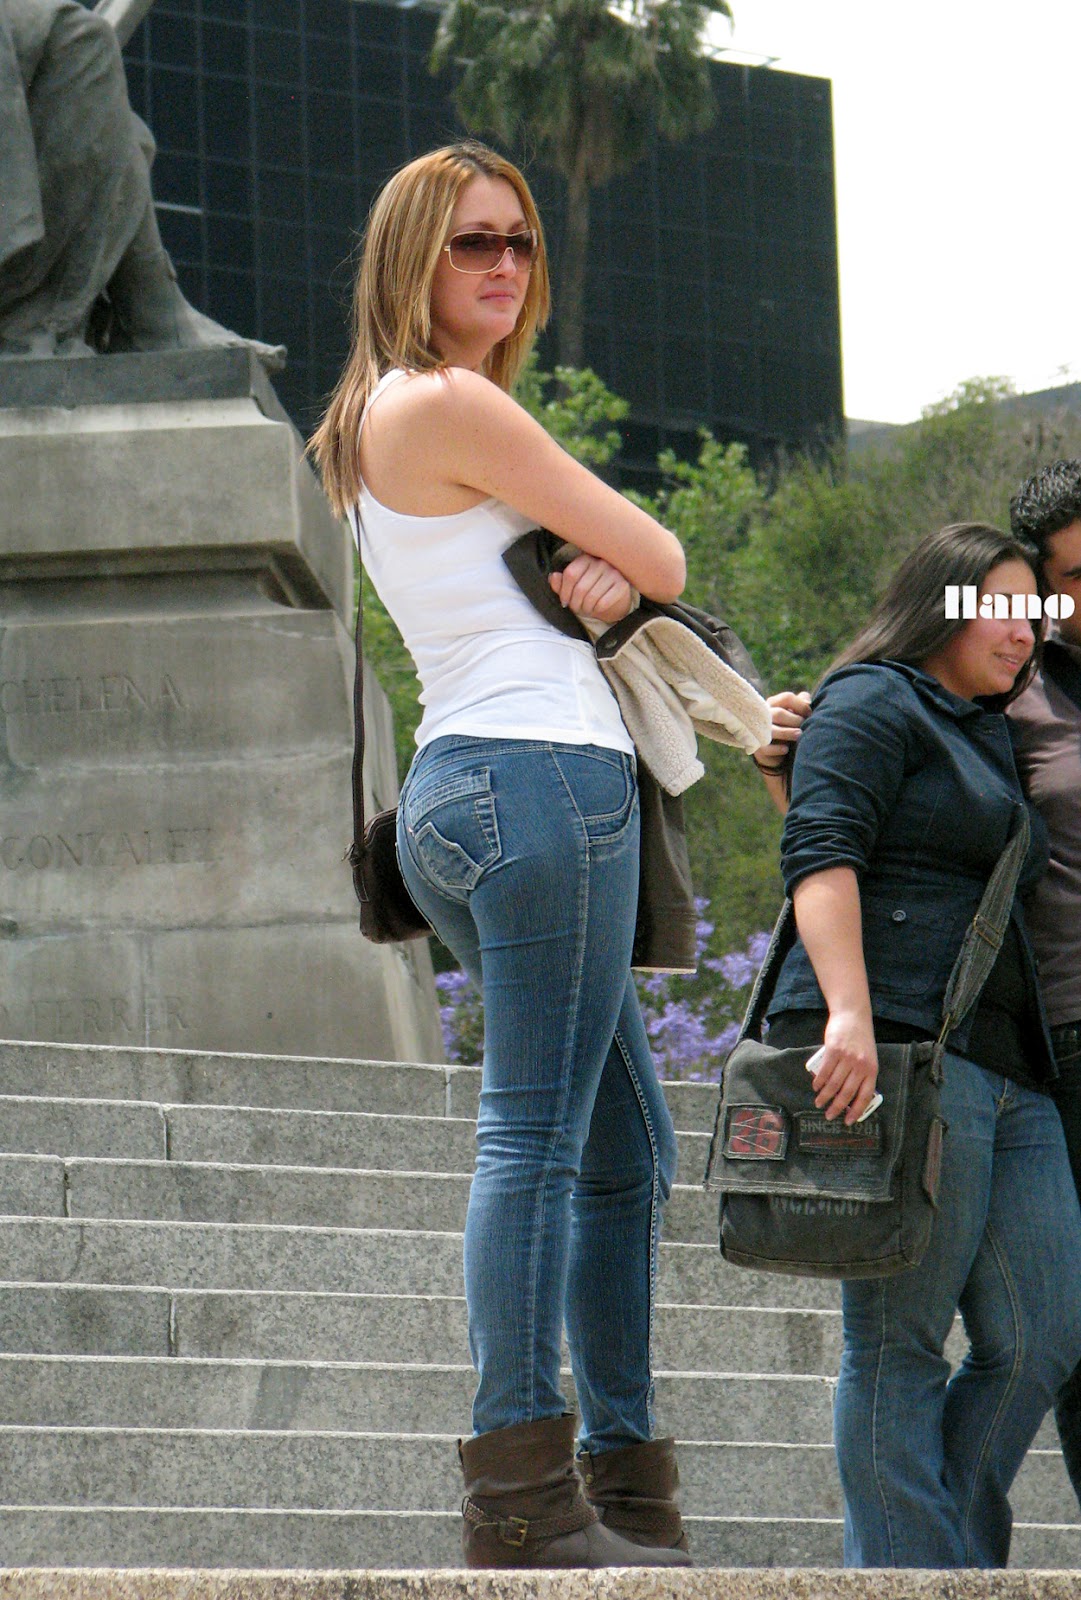 Beautiful Blonde With Tight Jeans Divine Butts Candid 21942 The Best Porn Website